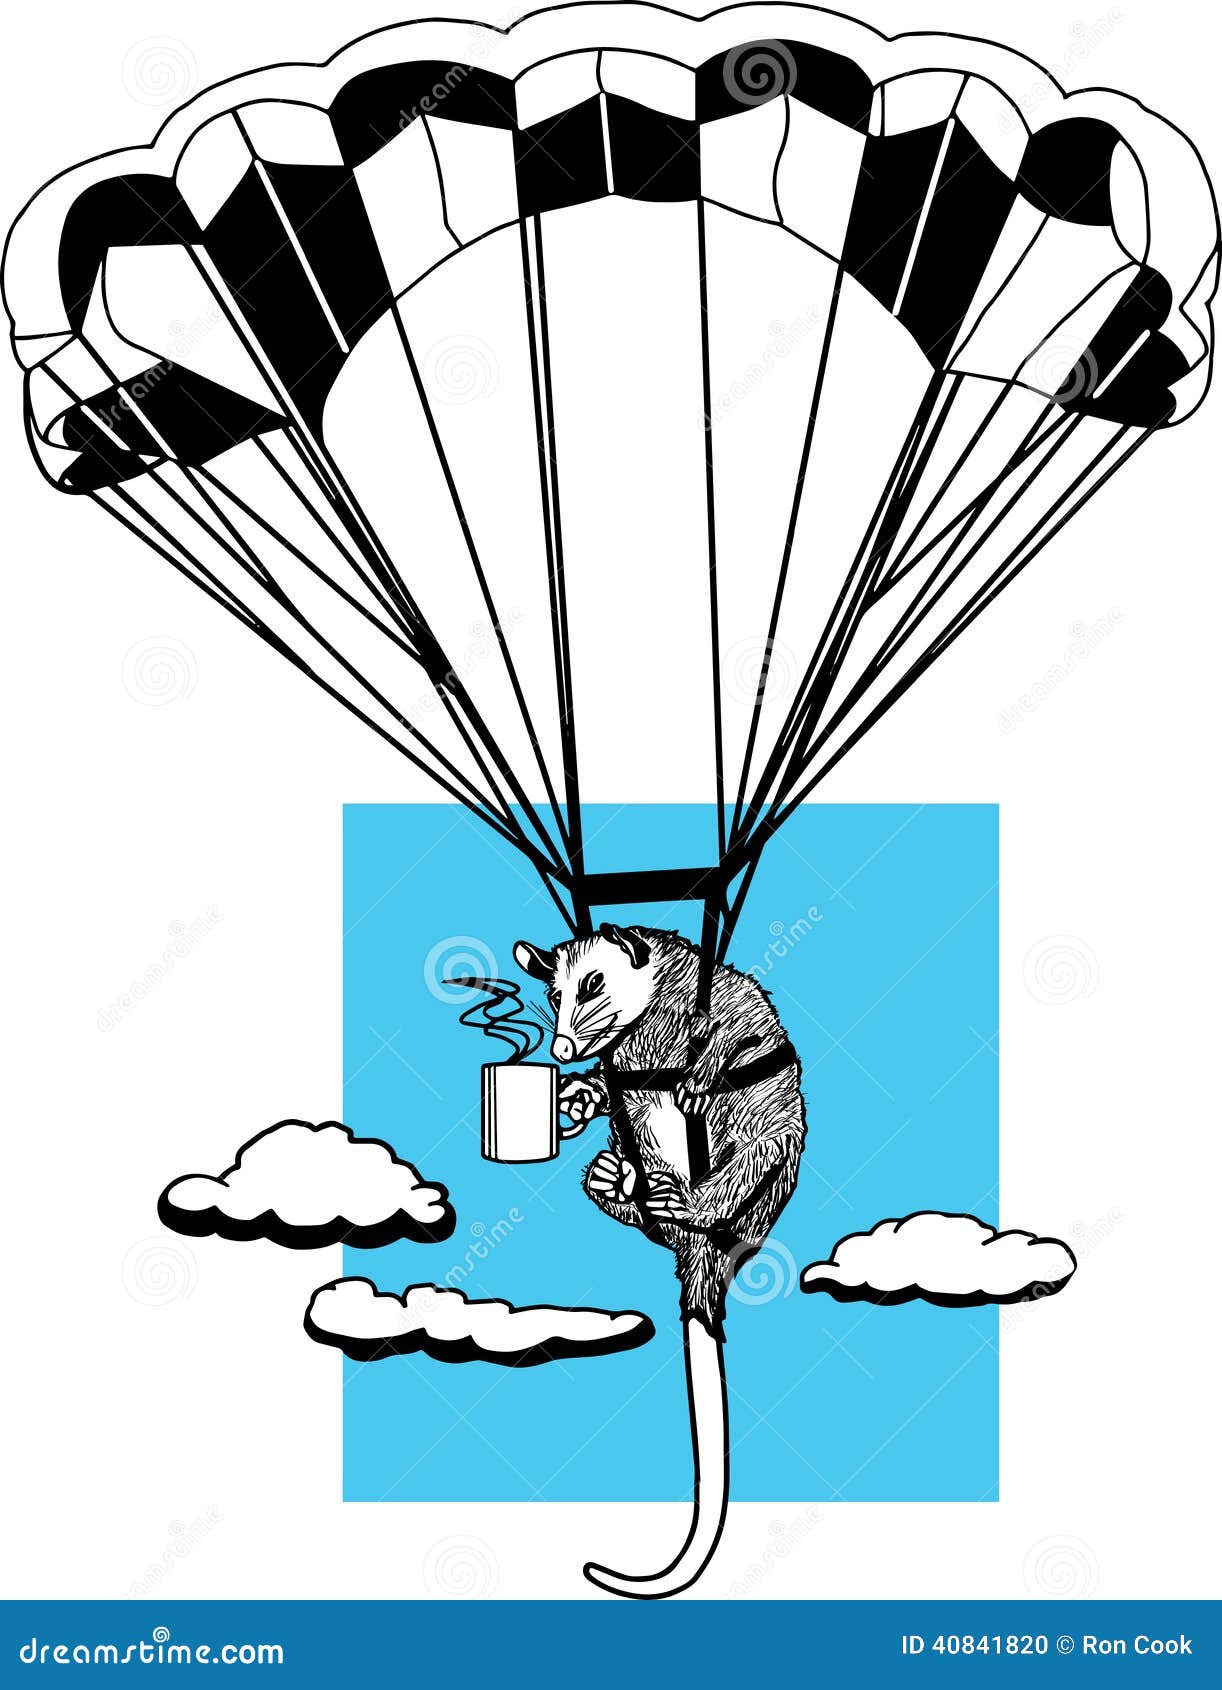 skydiving-opossum-vector-illustration-drinking-cup-hot-steamy-coffee-40841820.jpg